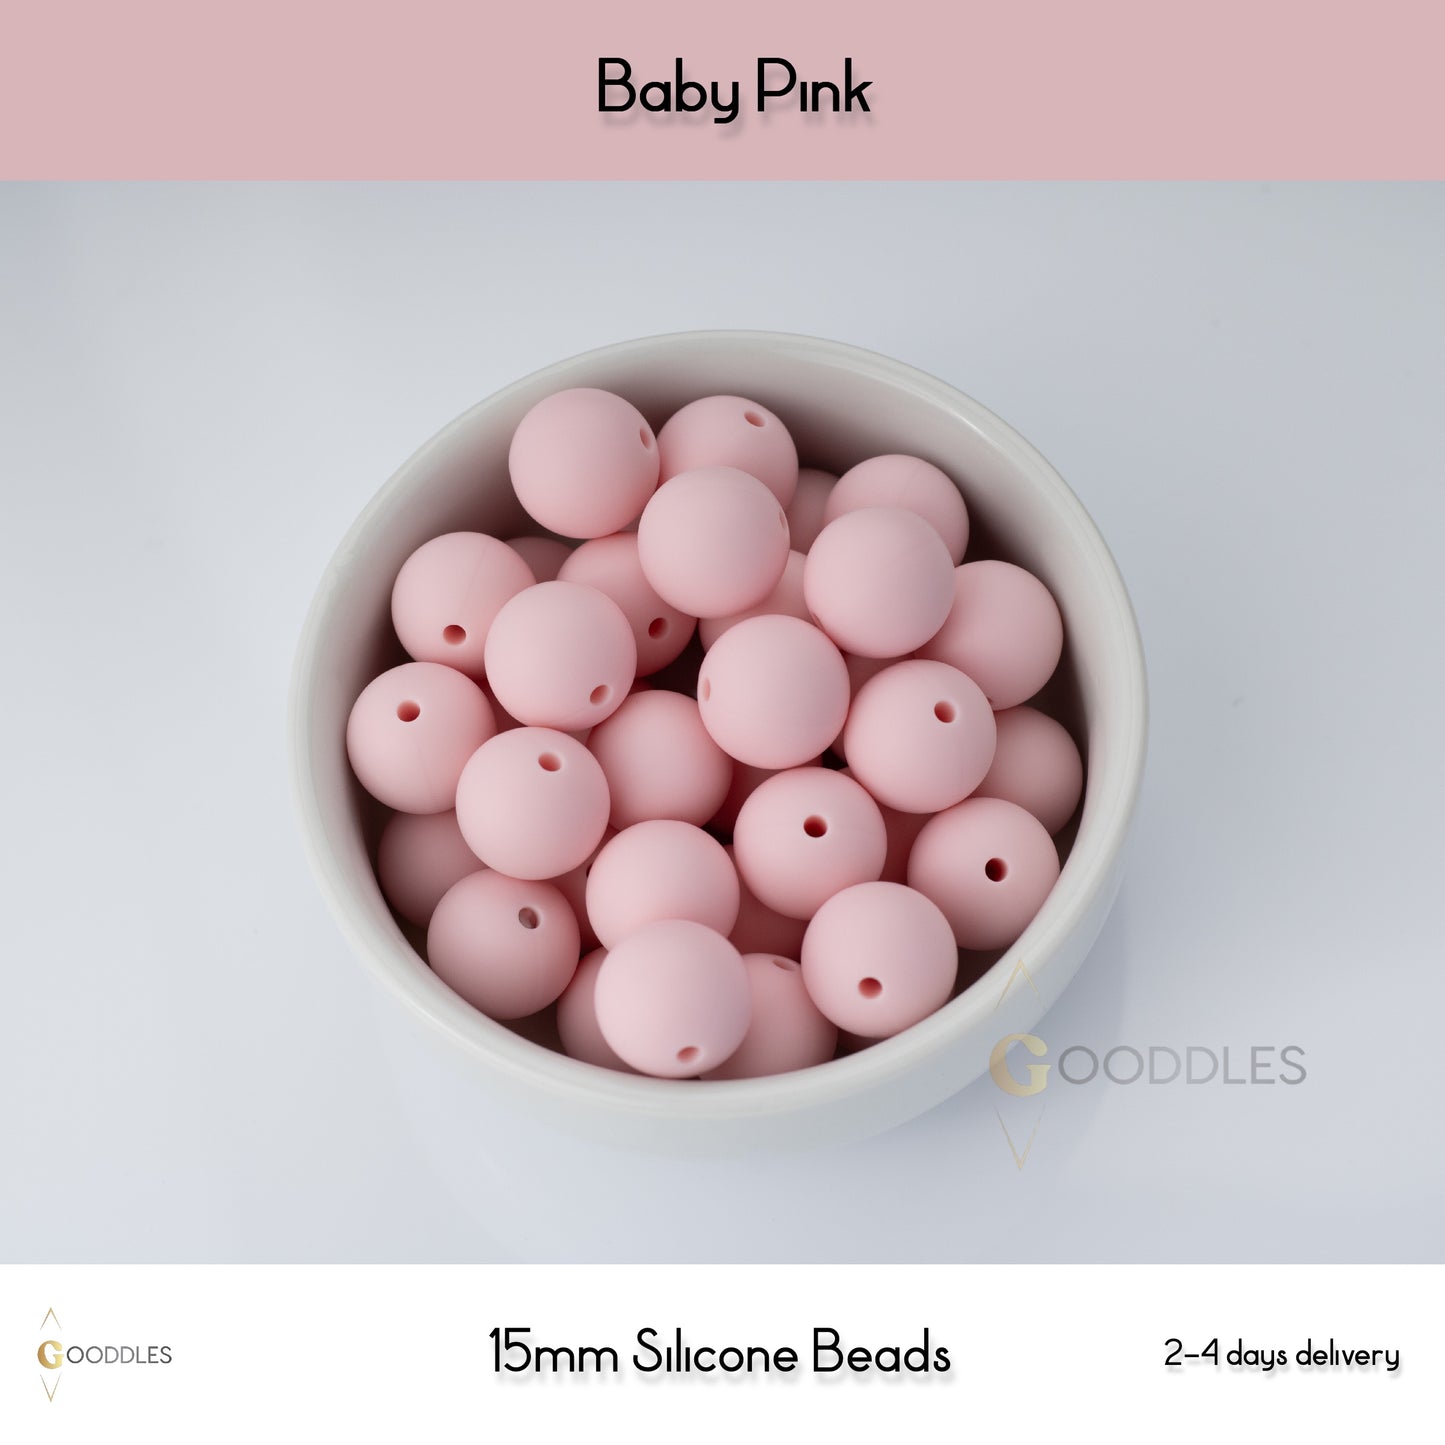 Baby Pink Silicone Beads Round Silicone Beads